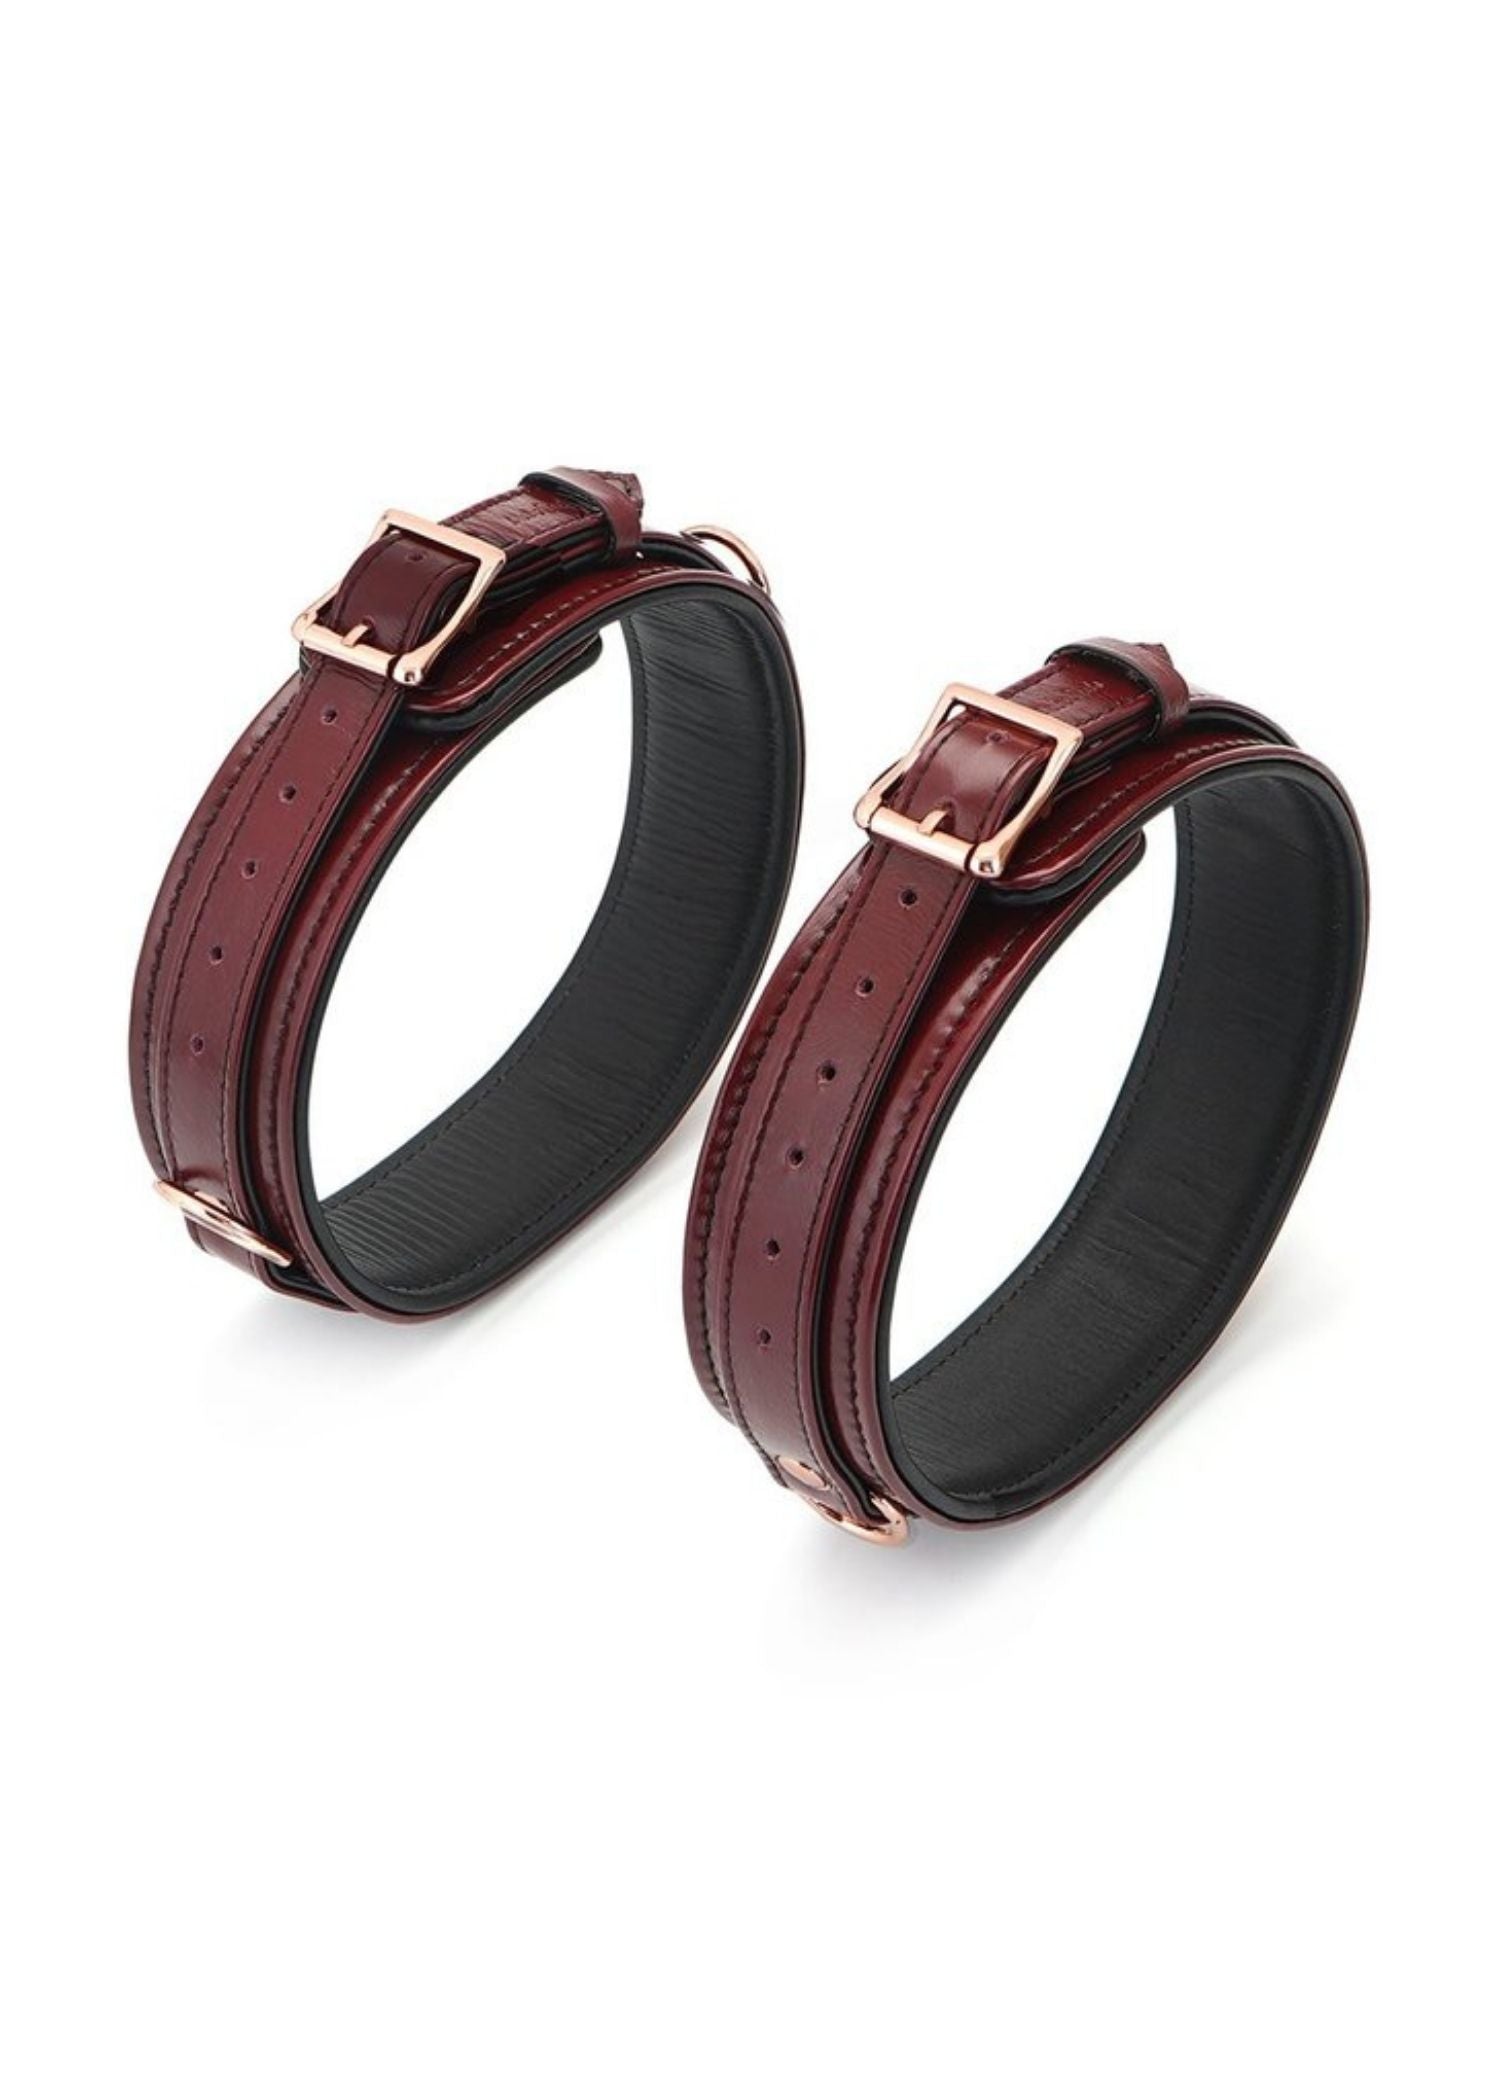 Liebe Seele Wine Red Leather Thigh Cuffs | Avec Amour